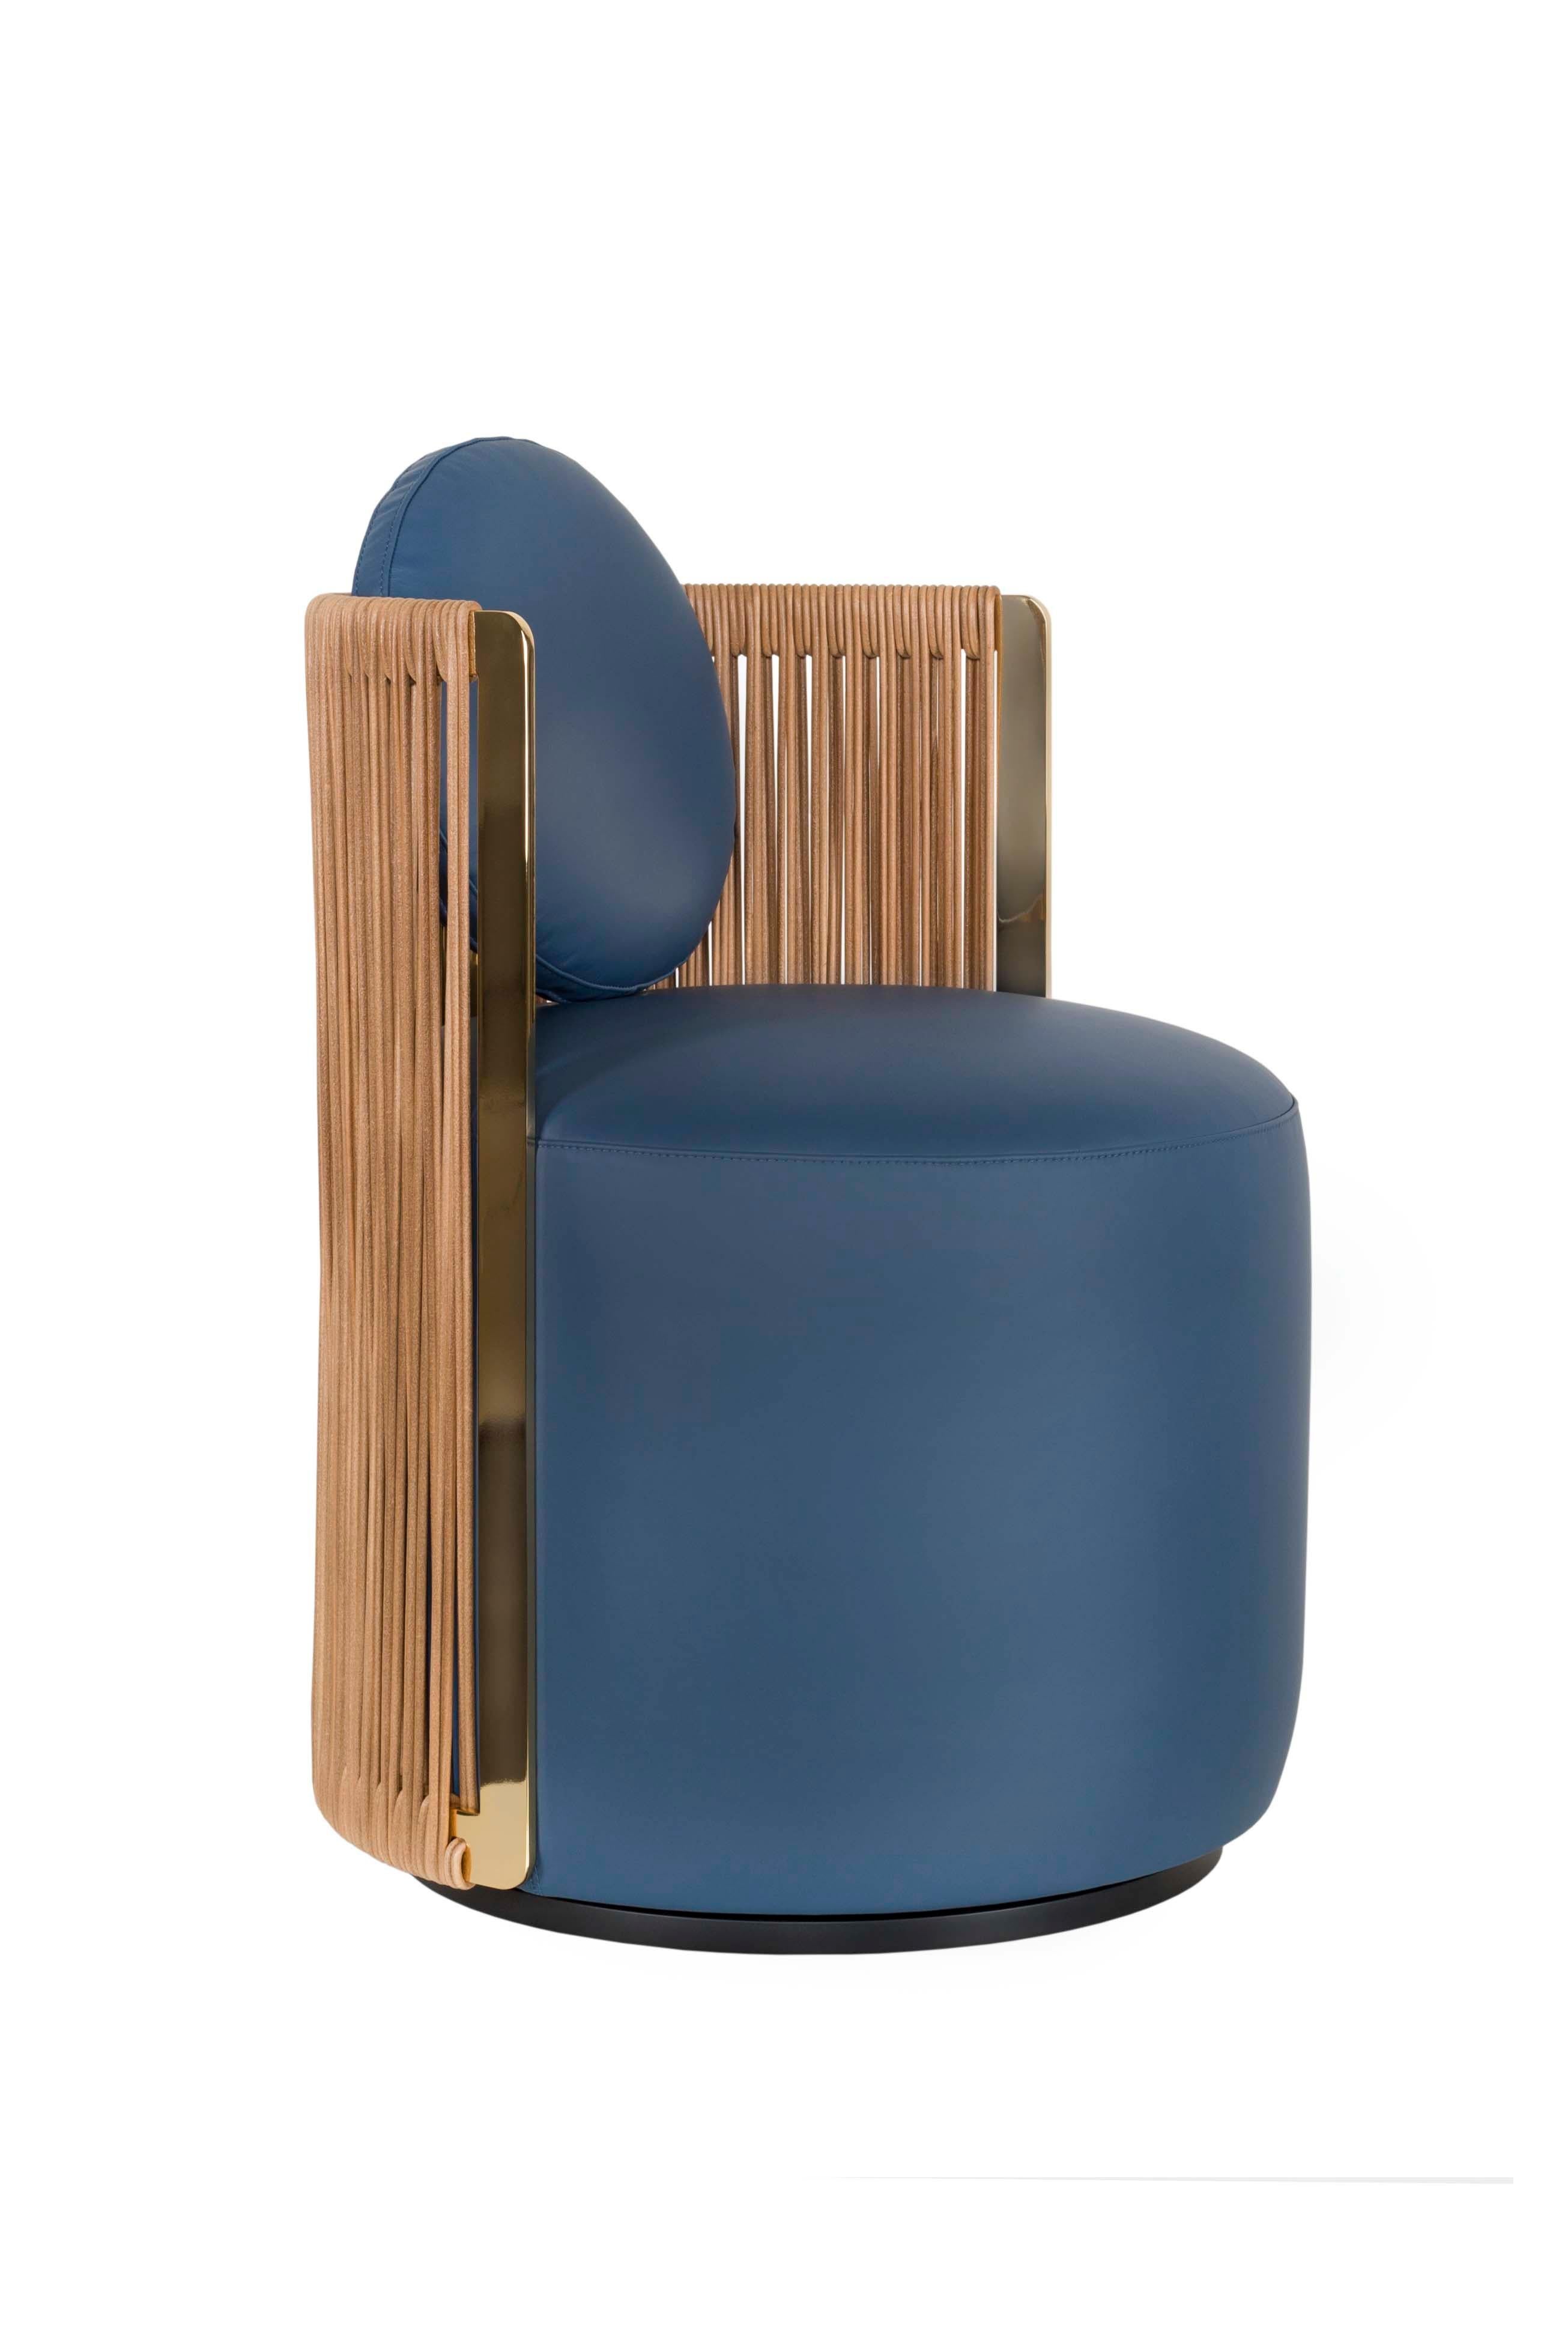 Italian Set/2 Modern Thea Armchair Natural and Blue Leather Handmade in Italy by Fendi For Sale